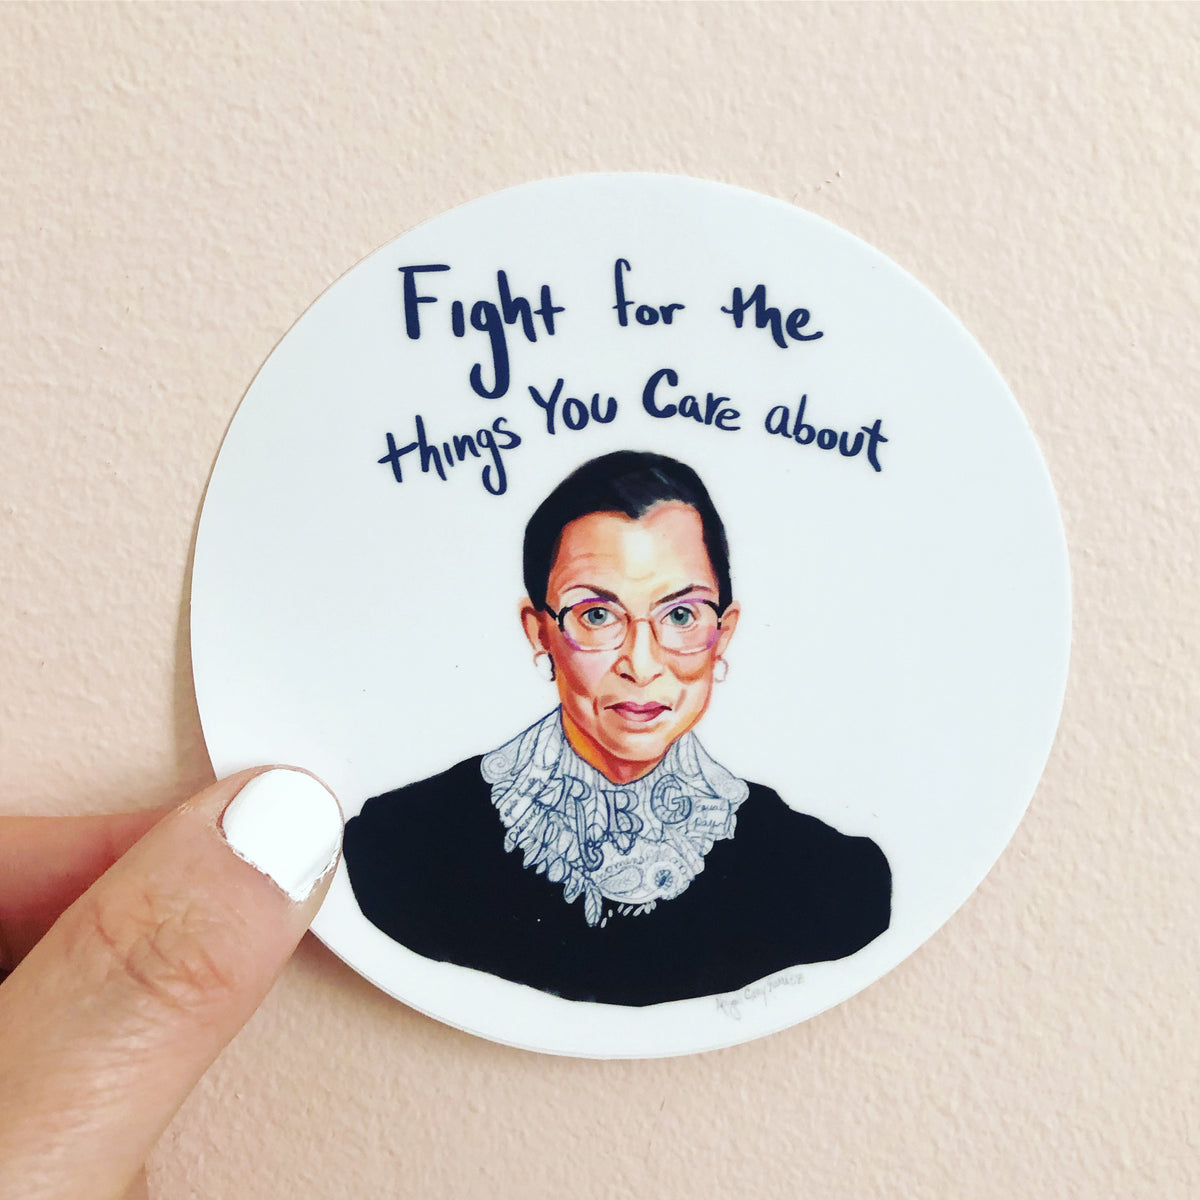 RBG portrait and quote sticker, &quot;Fight for the things you care about&quot; by Abigail Gray Swartz